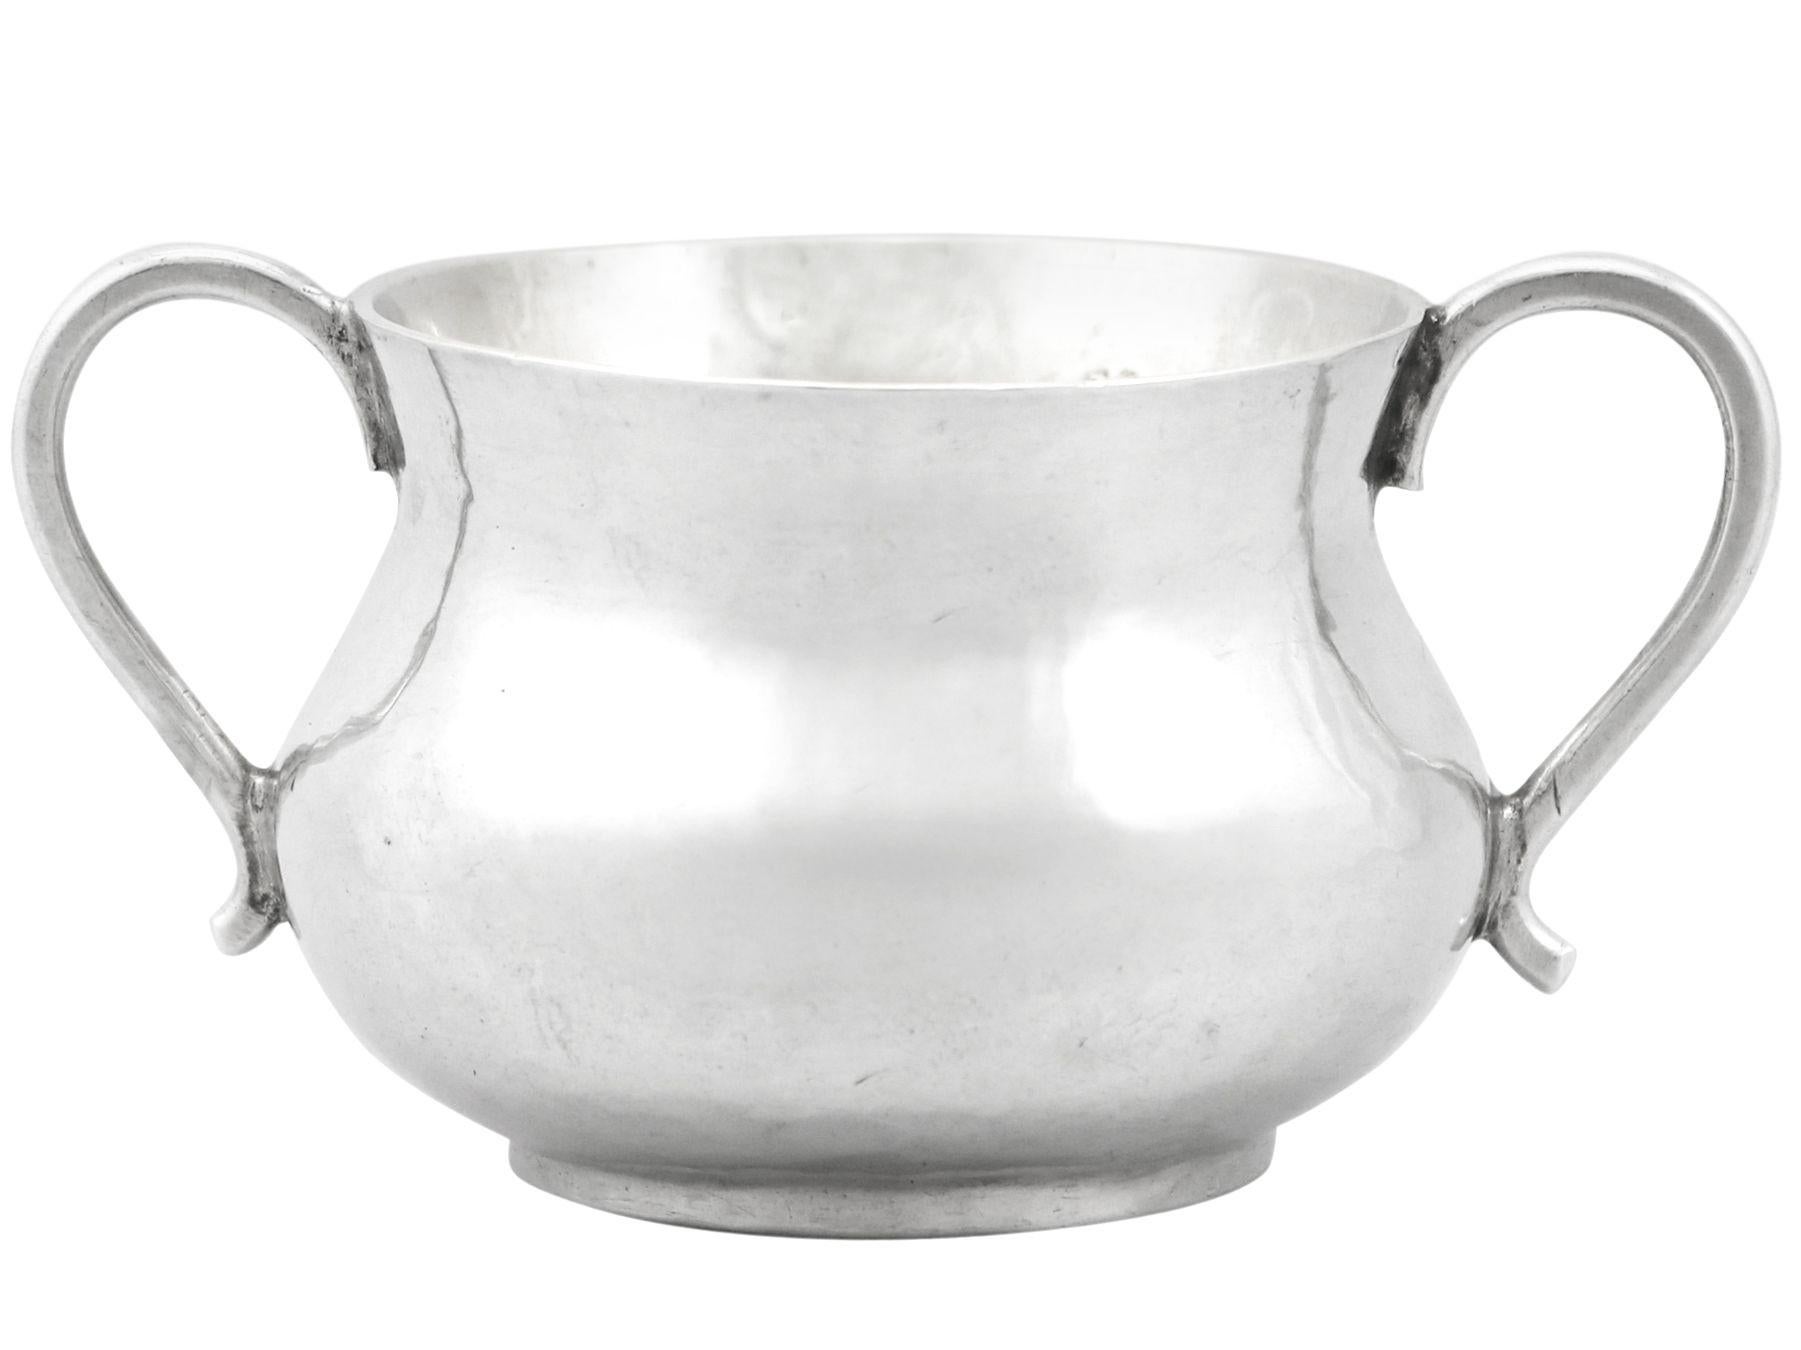 An exceptional, fine and impressive, rare antique Charles II English sterling silver baby porringer; part of our collectable silverware collection.

This exceptional antique Charles II sterling silver baby porringer has a circular rounded form